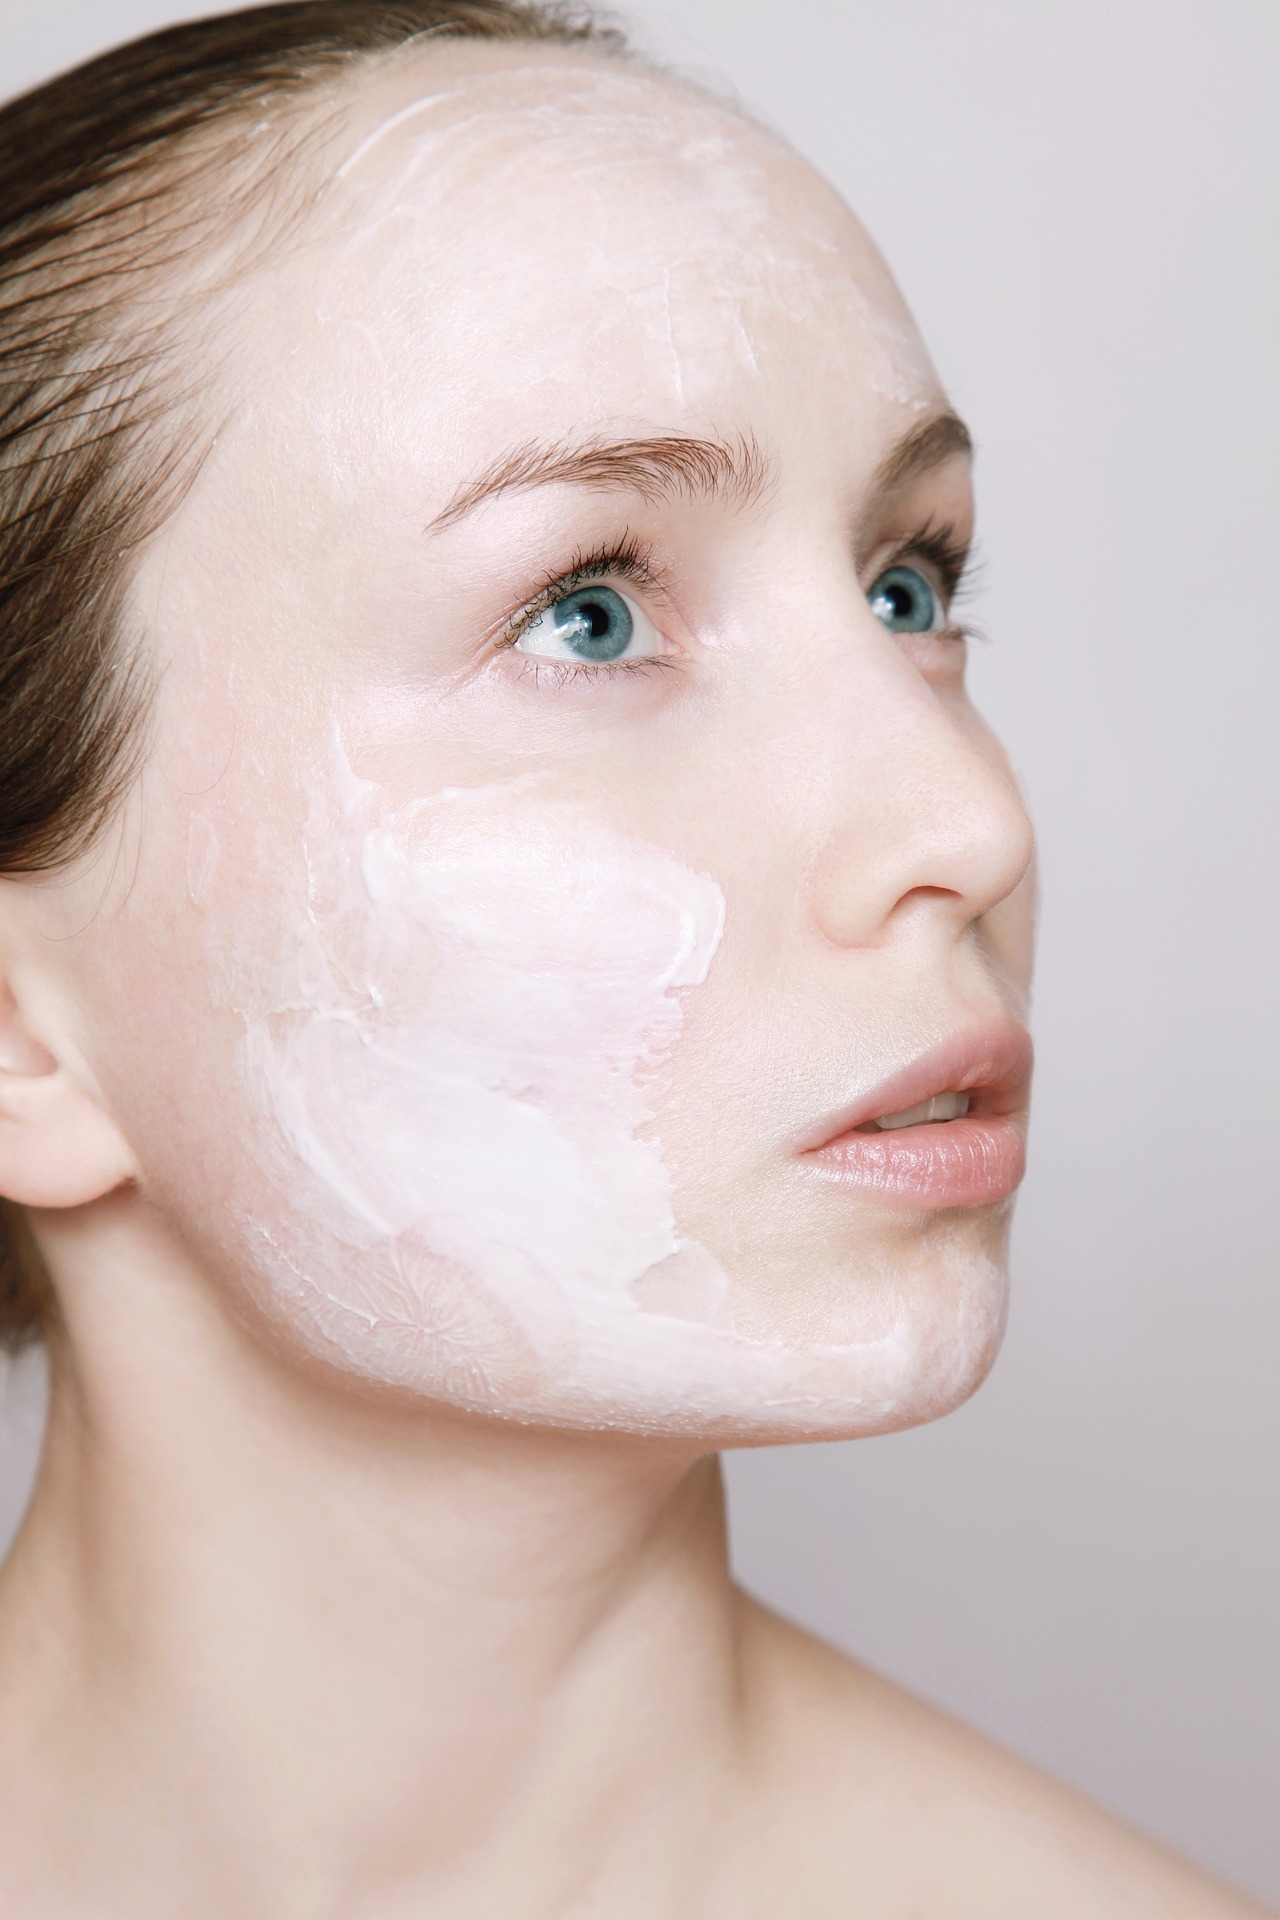 image of young woman's face with lotion